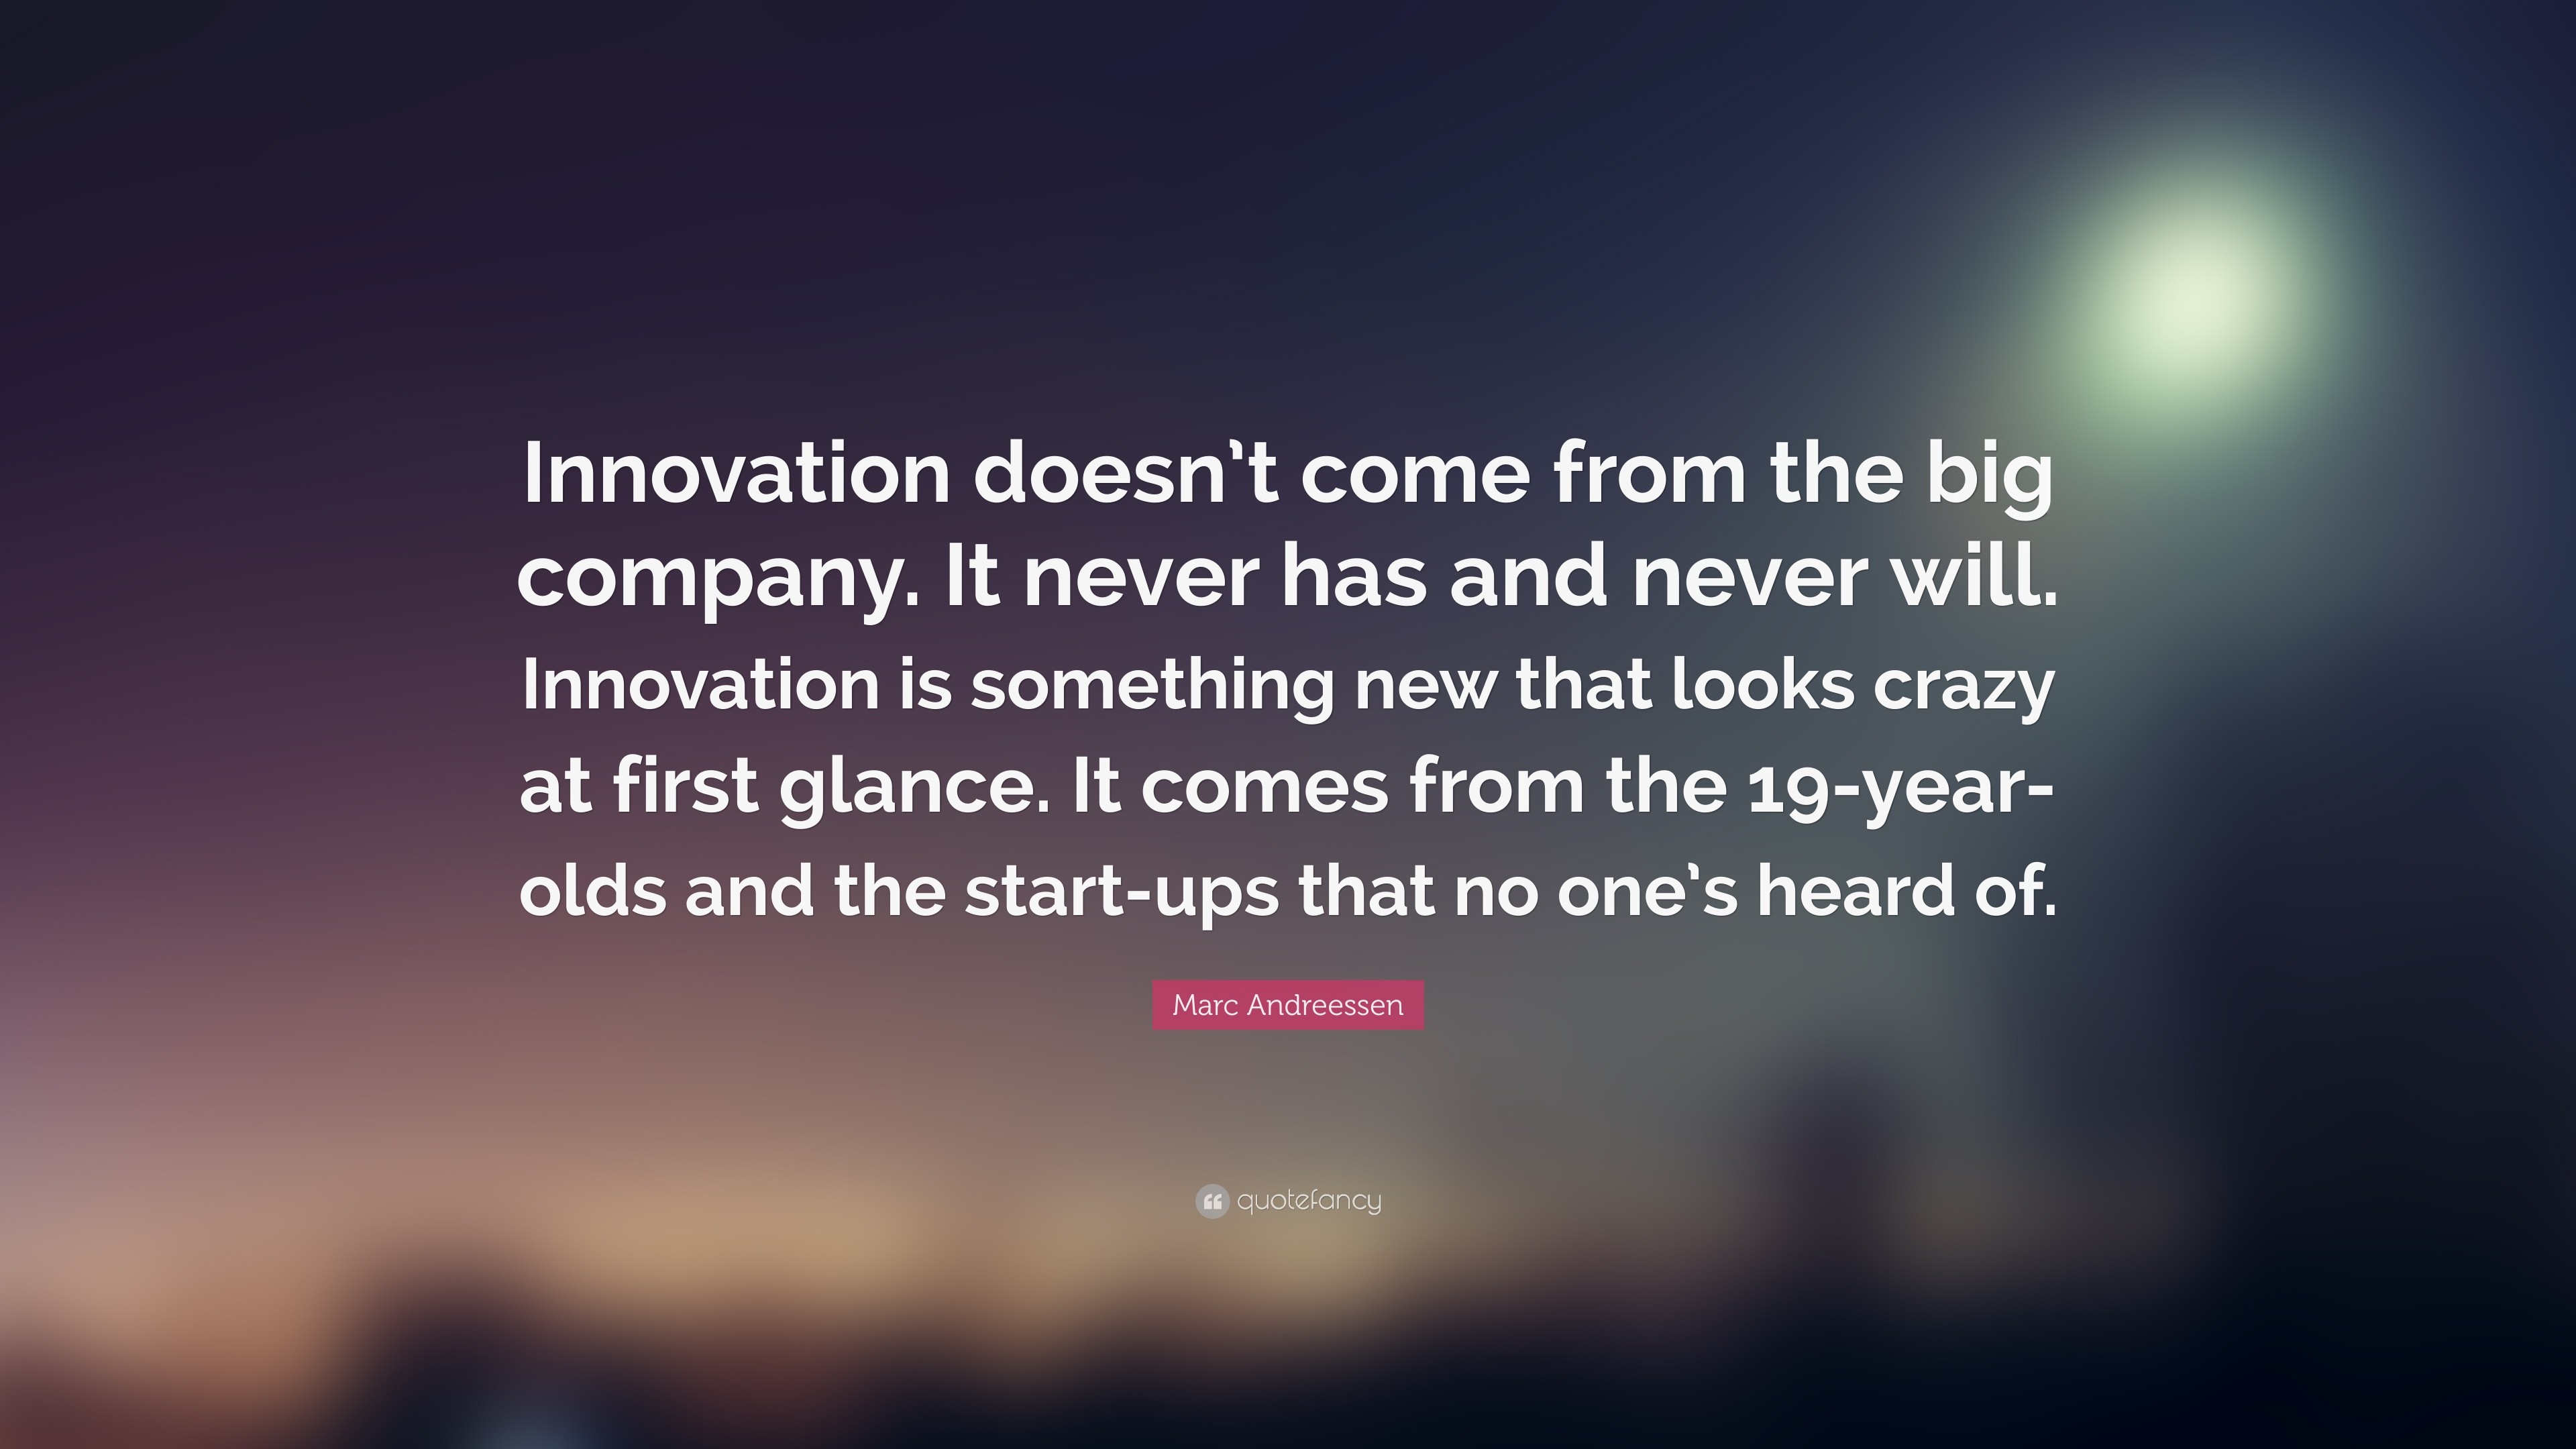 3840x2160 Marc Andreessen Quote: “Innovation doesn't come from the big company. It